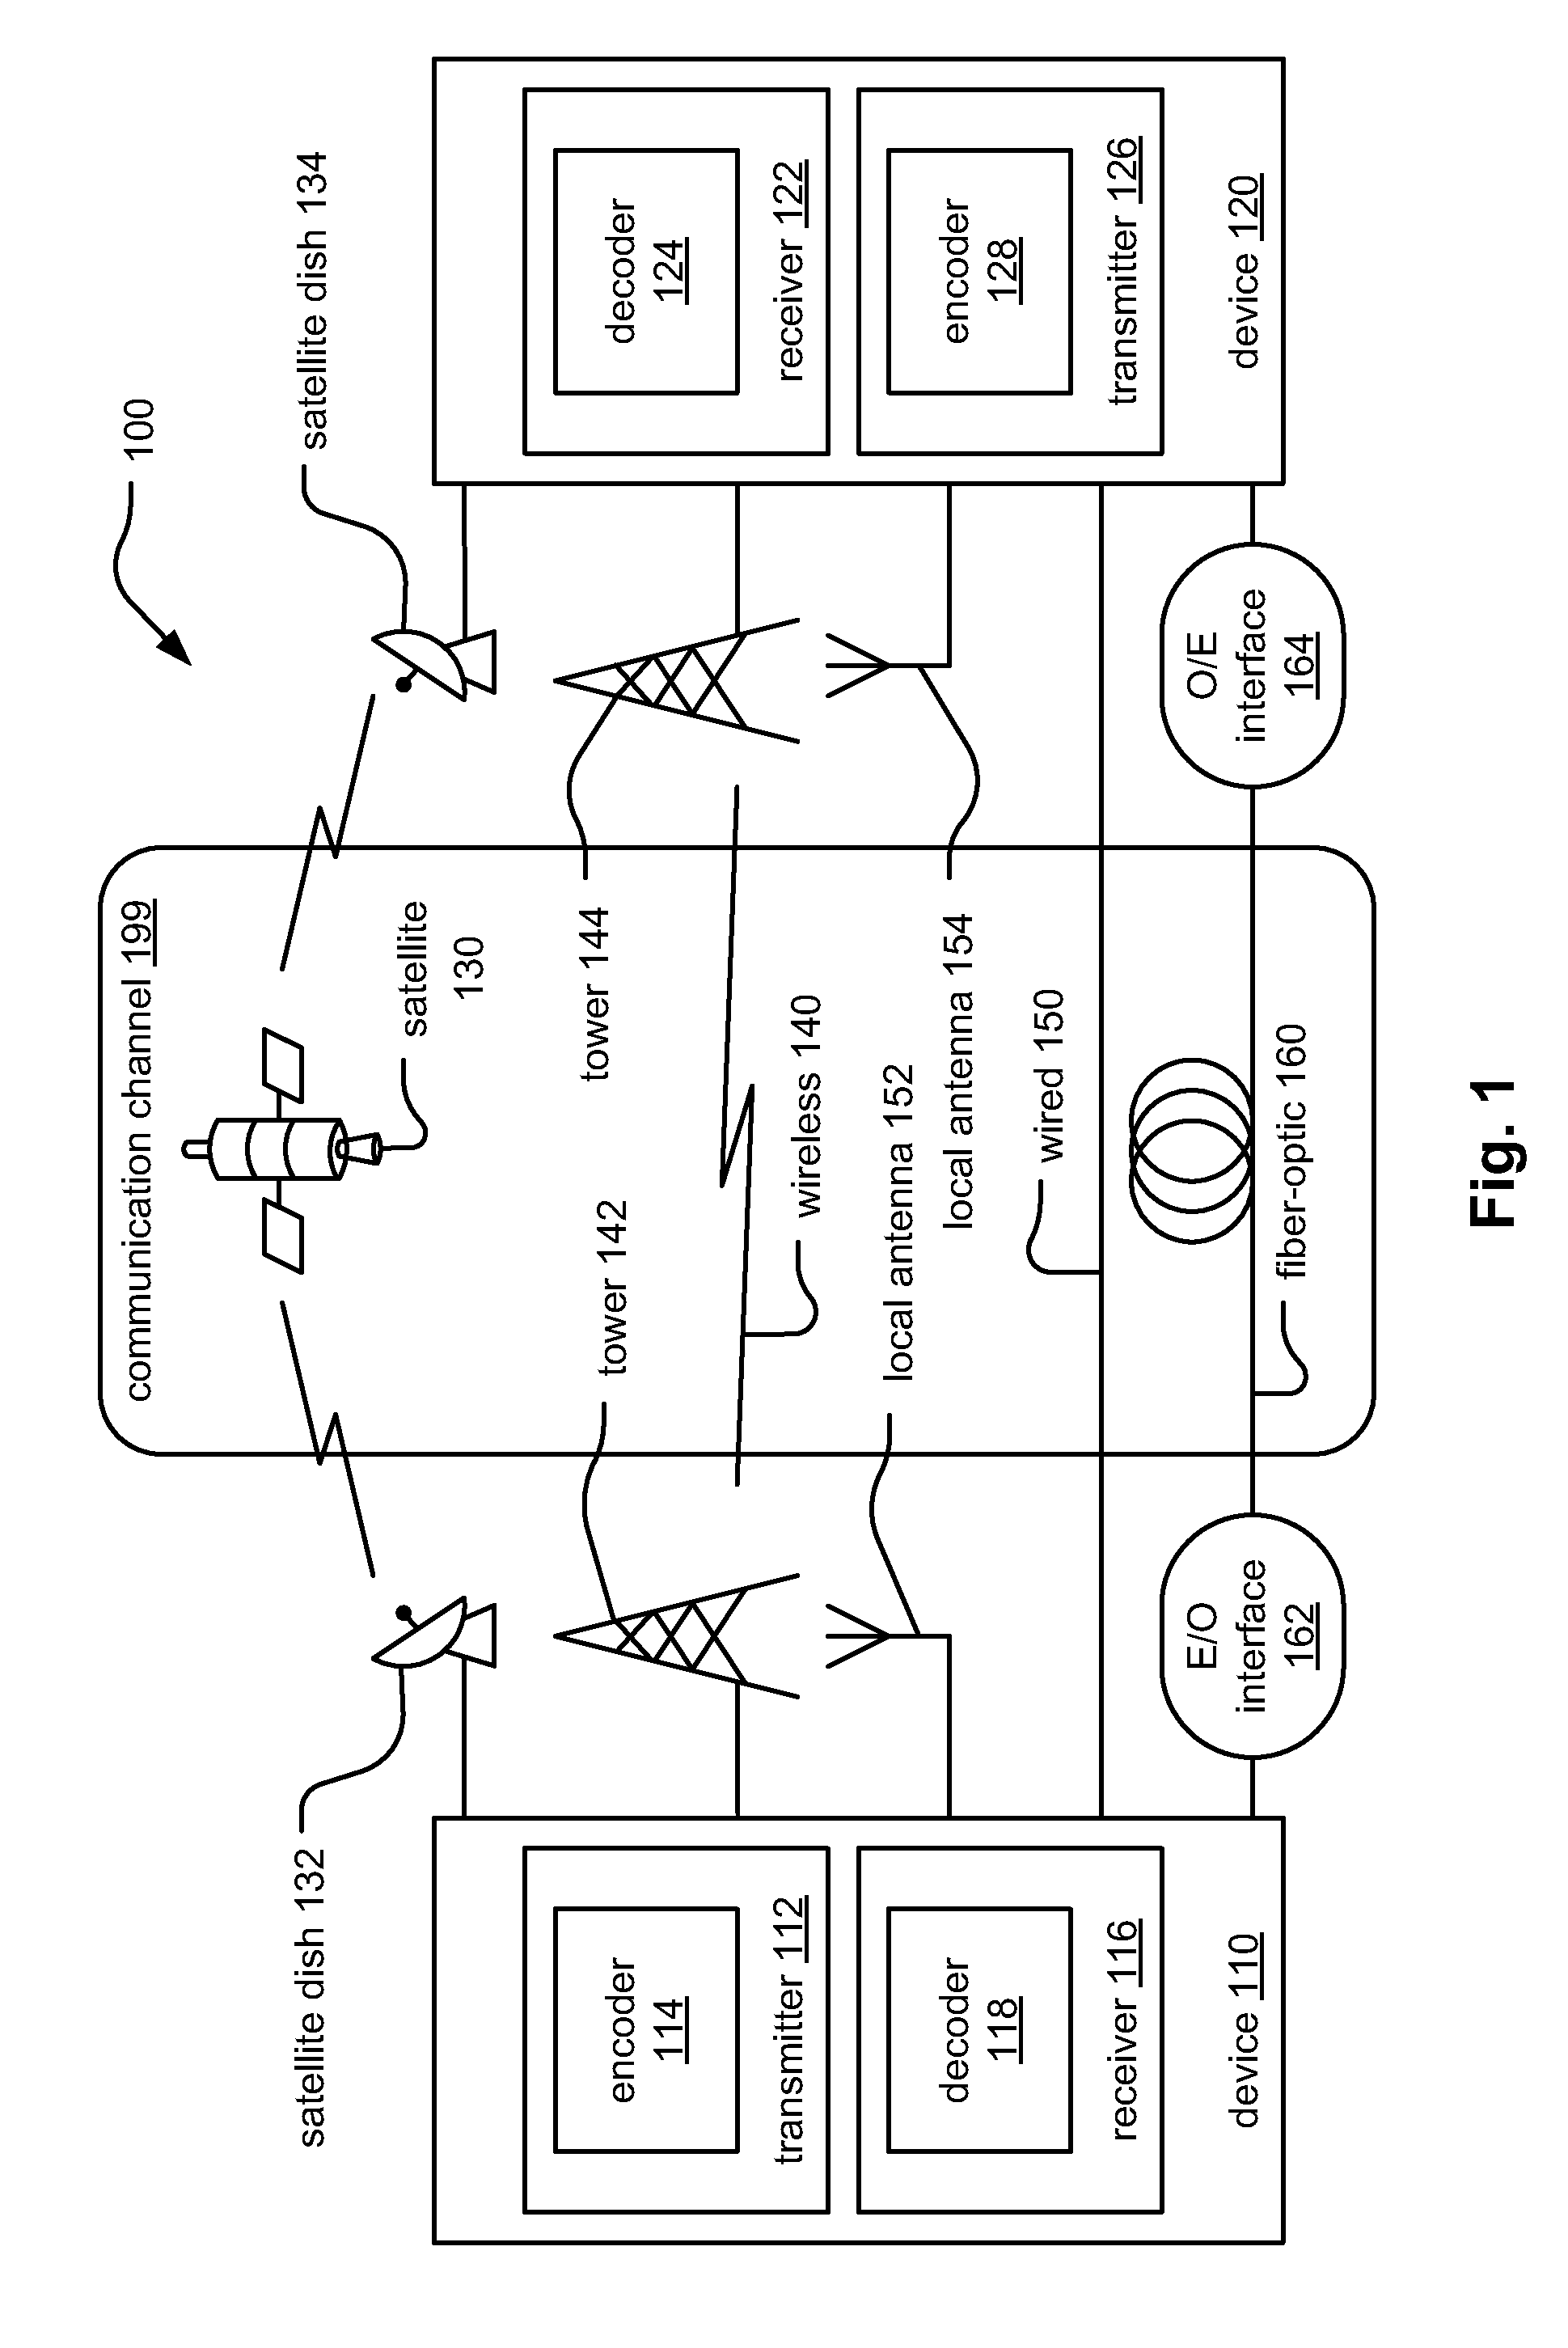 Electronic dispersion compensation within optical communications using reconstruction